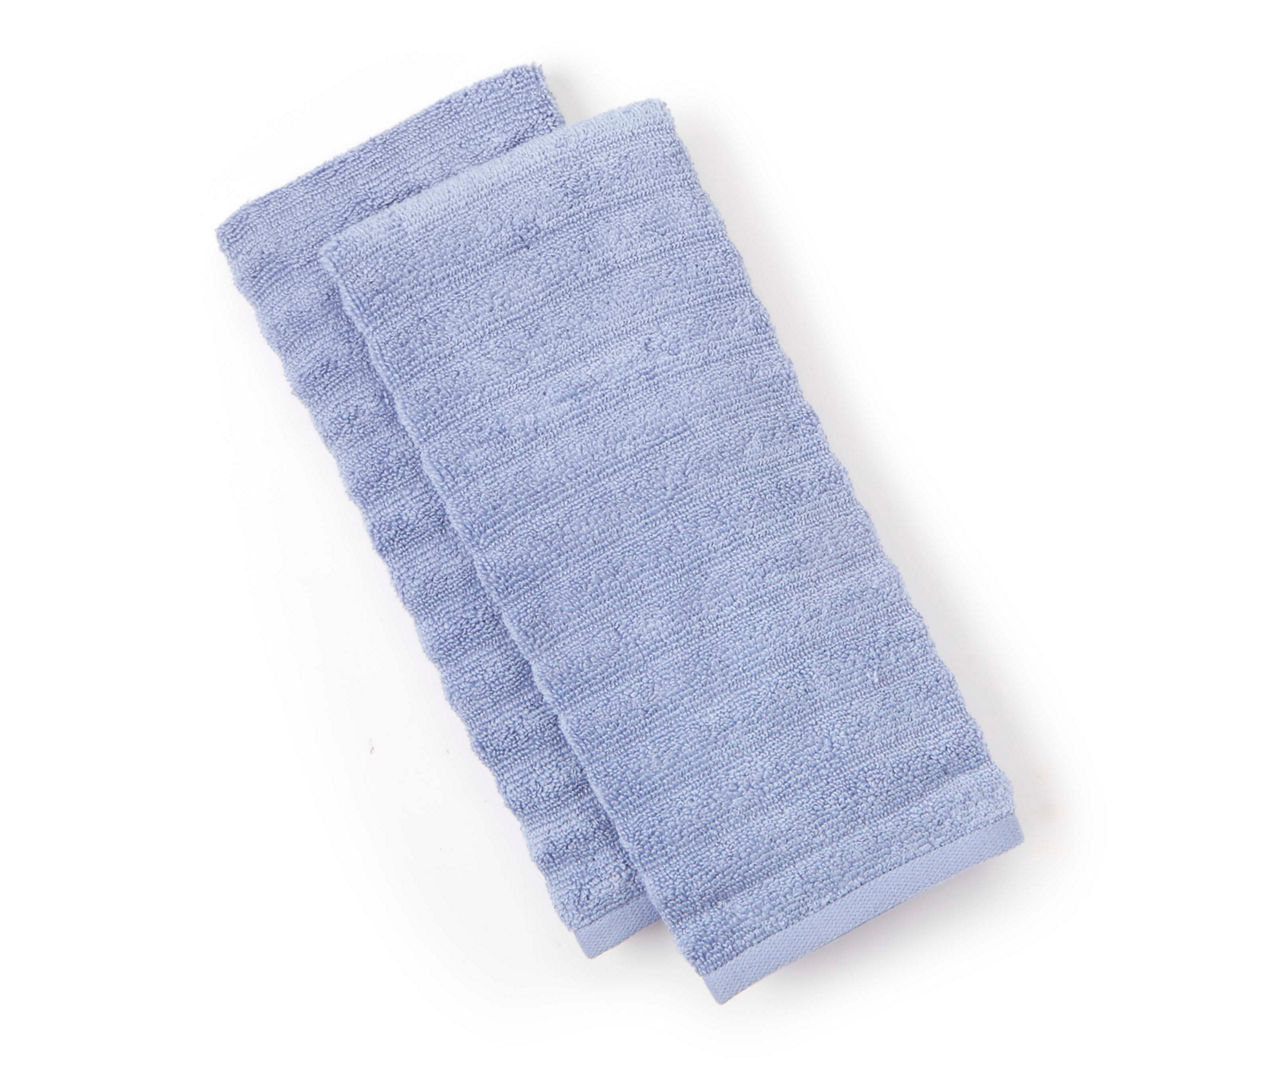 English Manor Blue Textured Stripe Hand Towel, 2-Pack